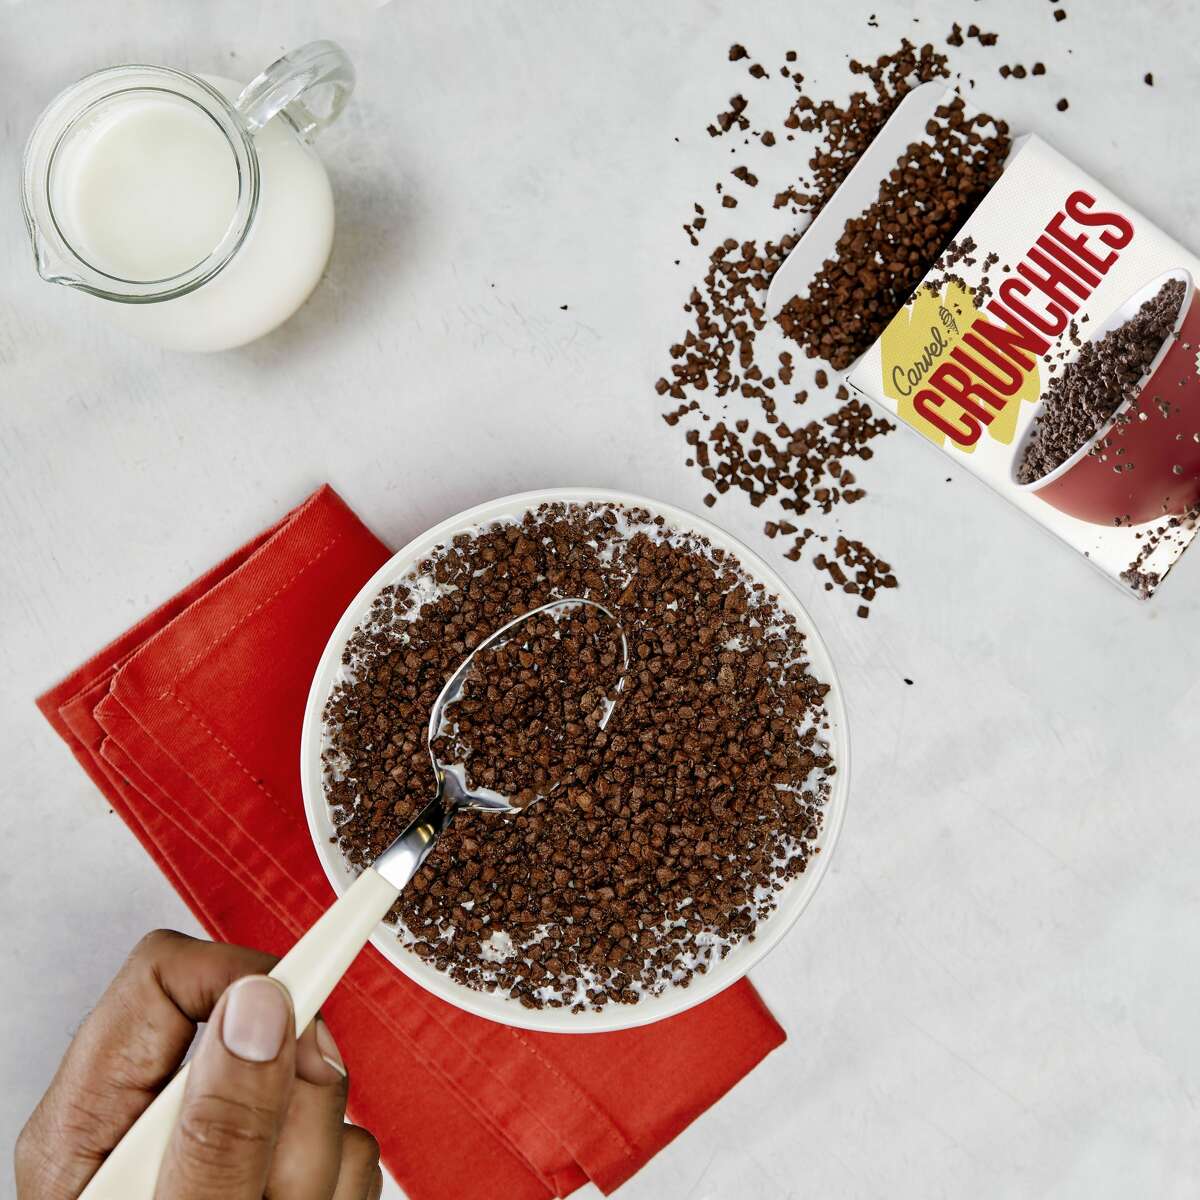 Carvel's limited-edition Crunchies cereal and new Crunchies-filled treats lineup.